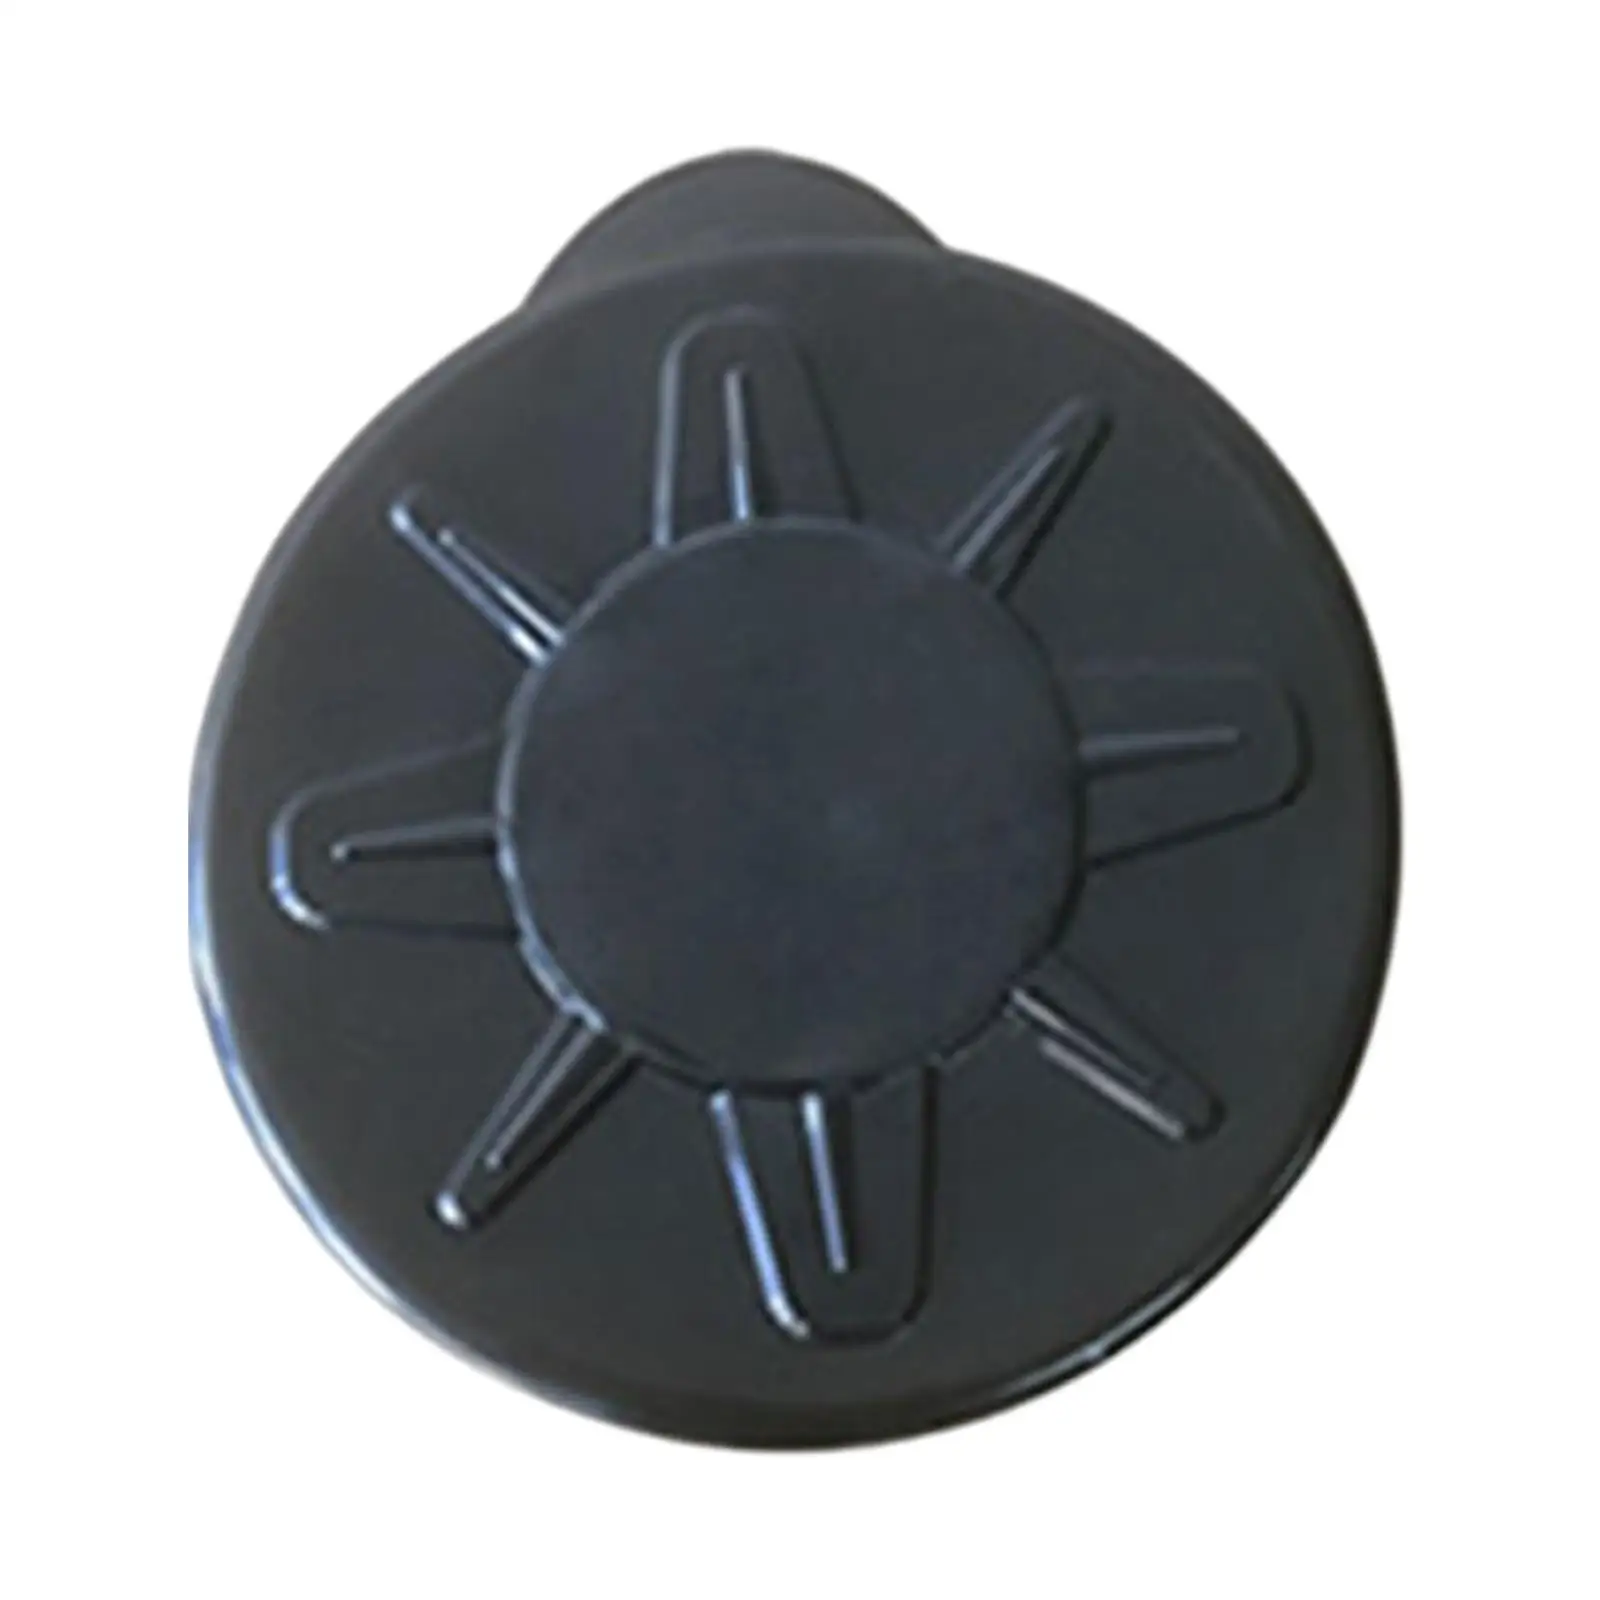 Kayak Hatches Boat Sealing Hatch Round/Oval Accessories Black Access Hatch Parts Replacement Hatches for Kayak Boat